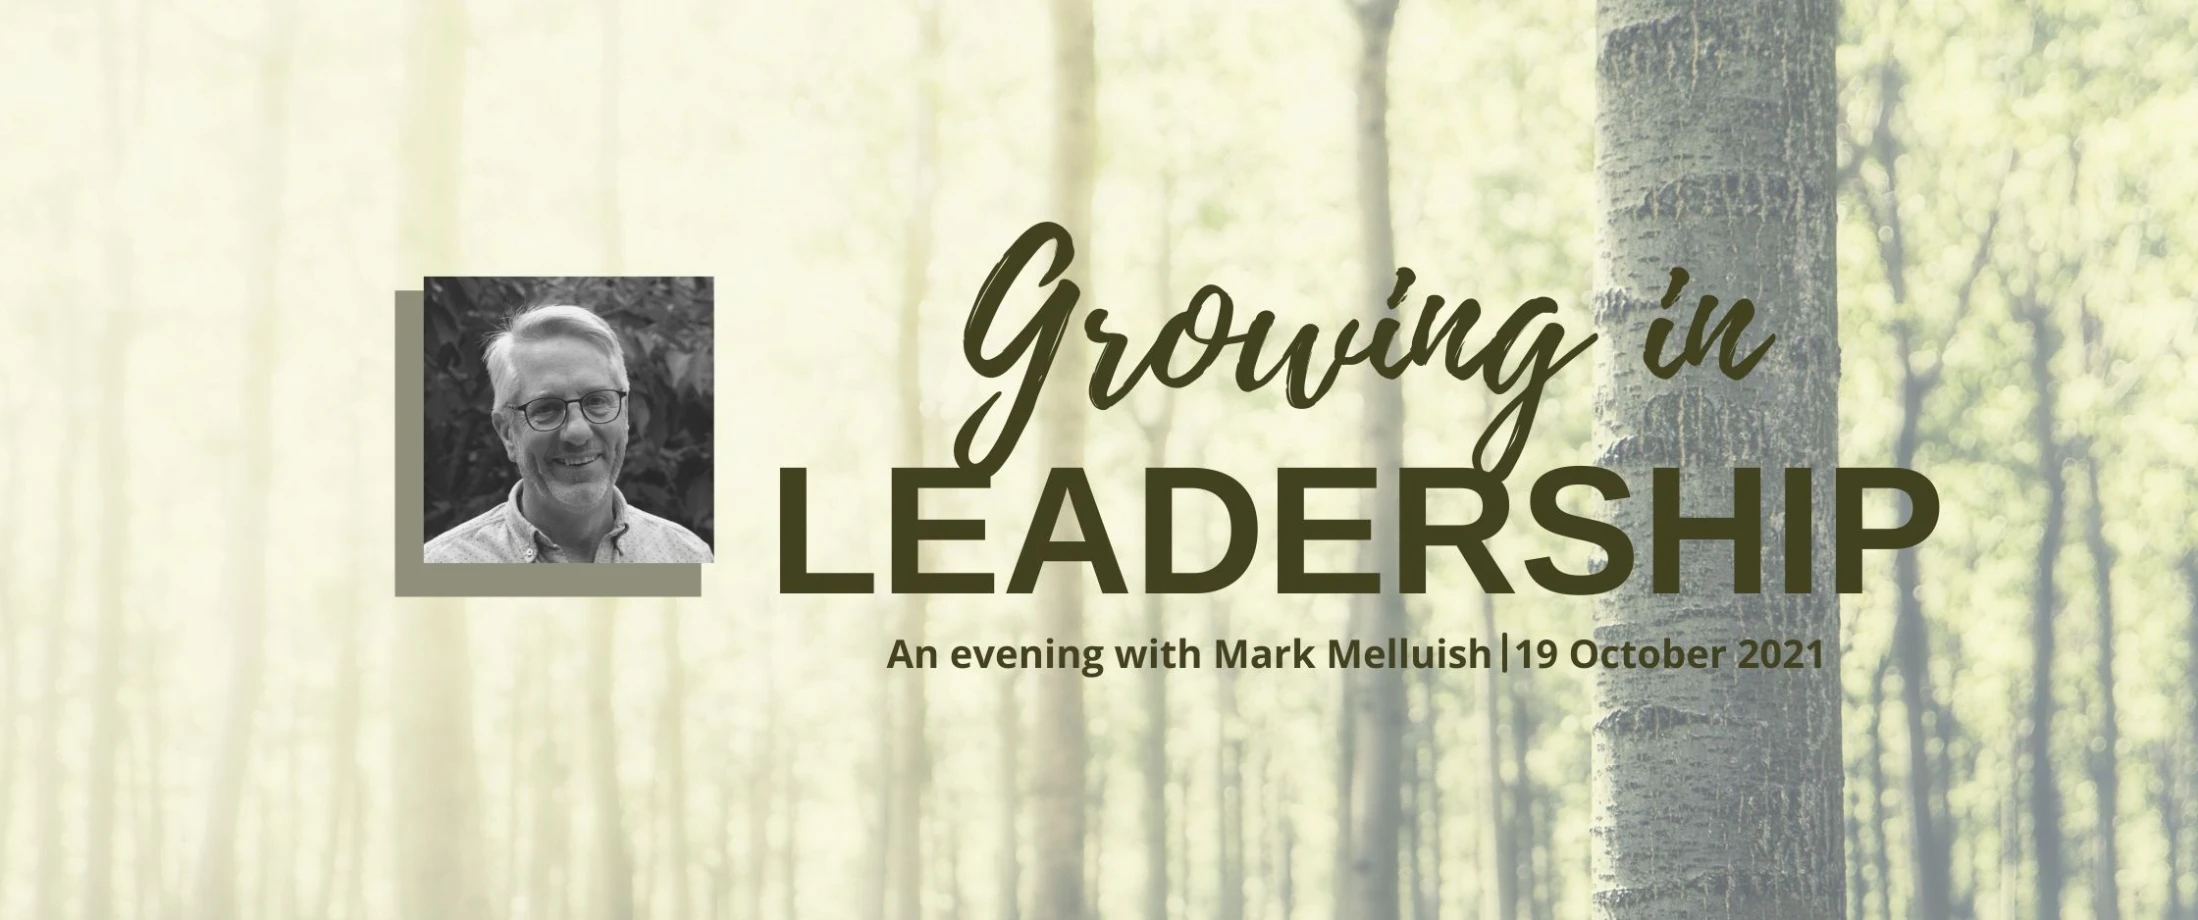 An evening for leaders in the diocese